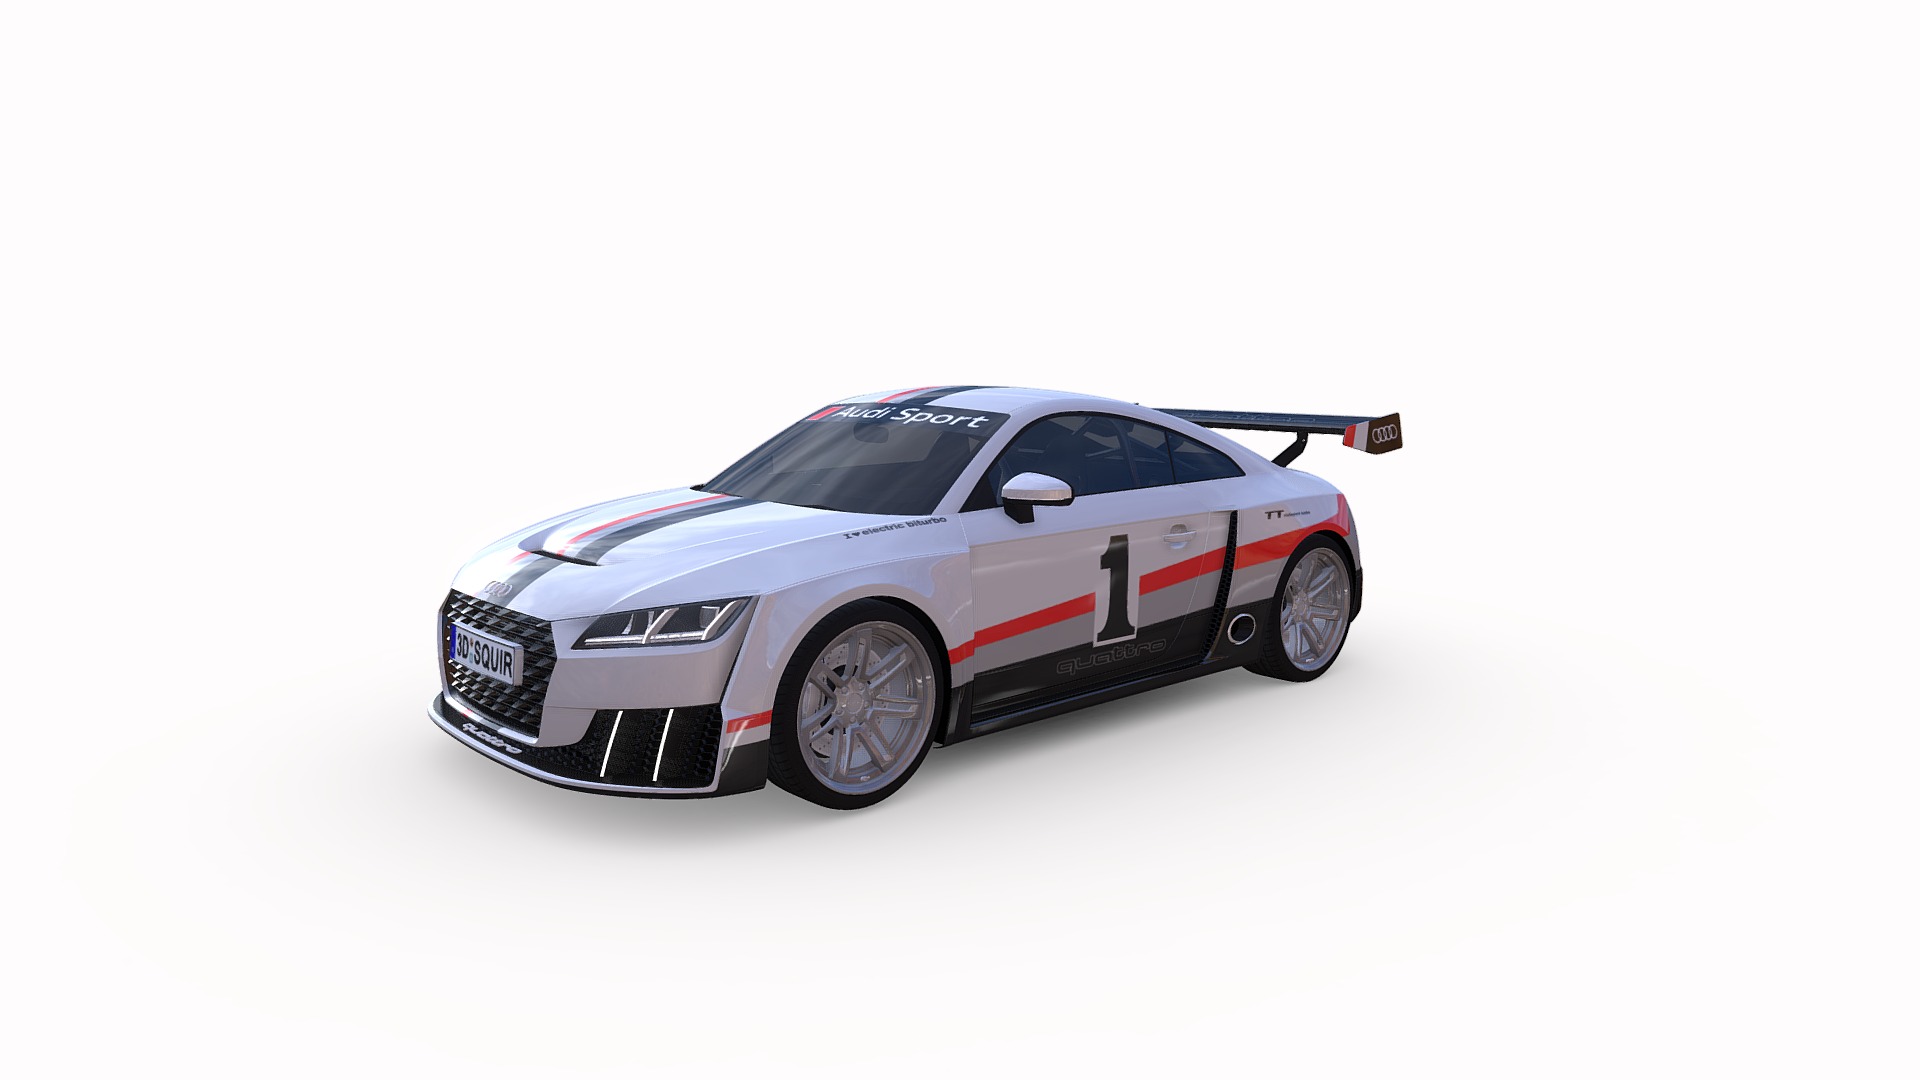 3D model Audi TT RS Clubsport Turbo 2017 - This is a 3D model of the Audi TT RS Clubsport Turbo 2017. The 3D model is about a white car with red stripes.